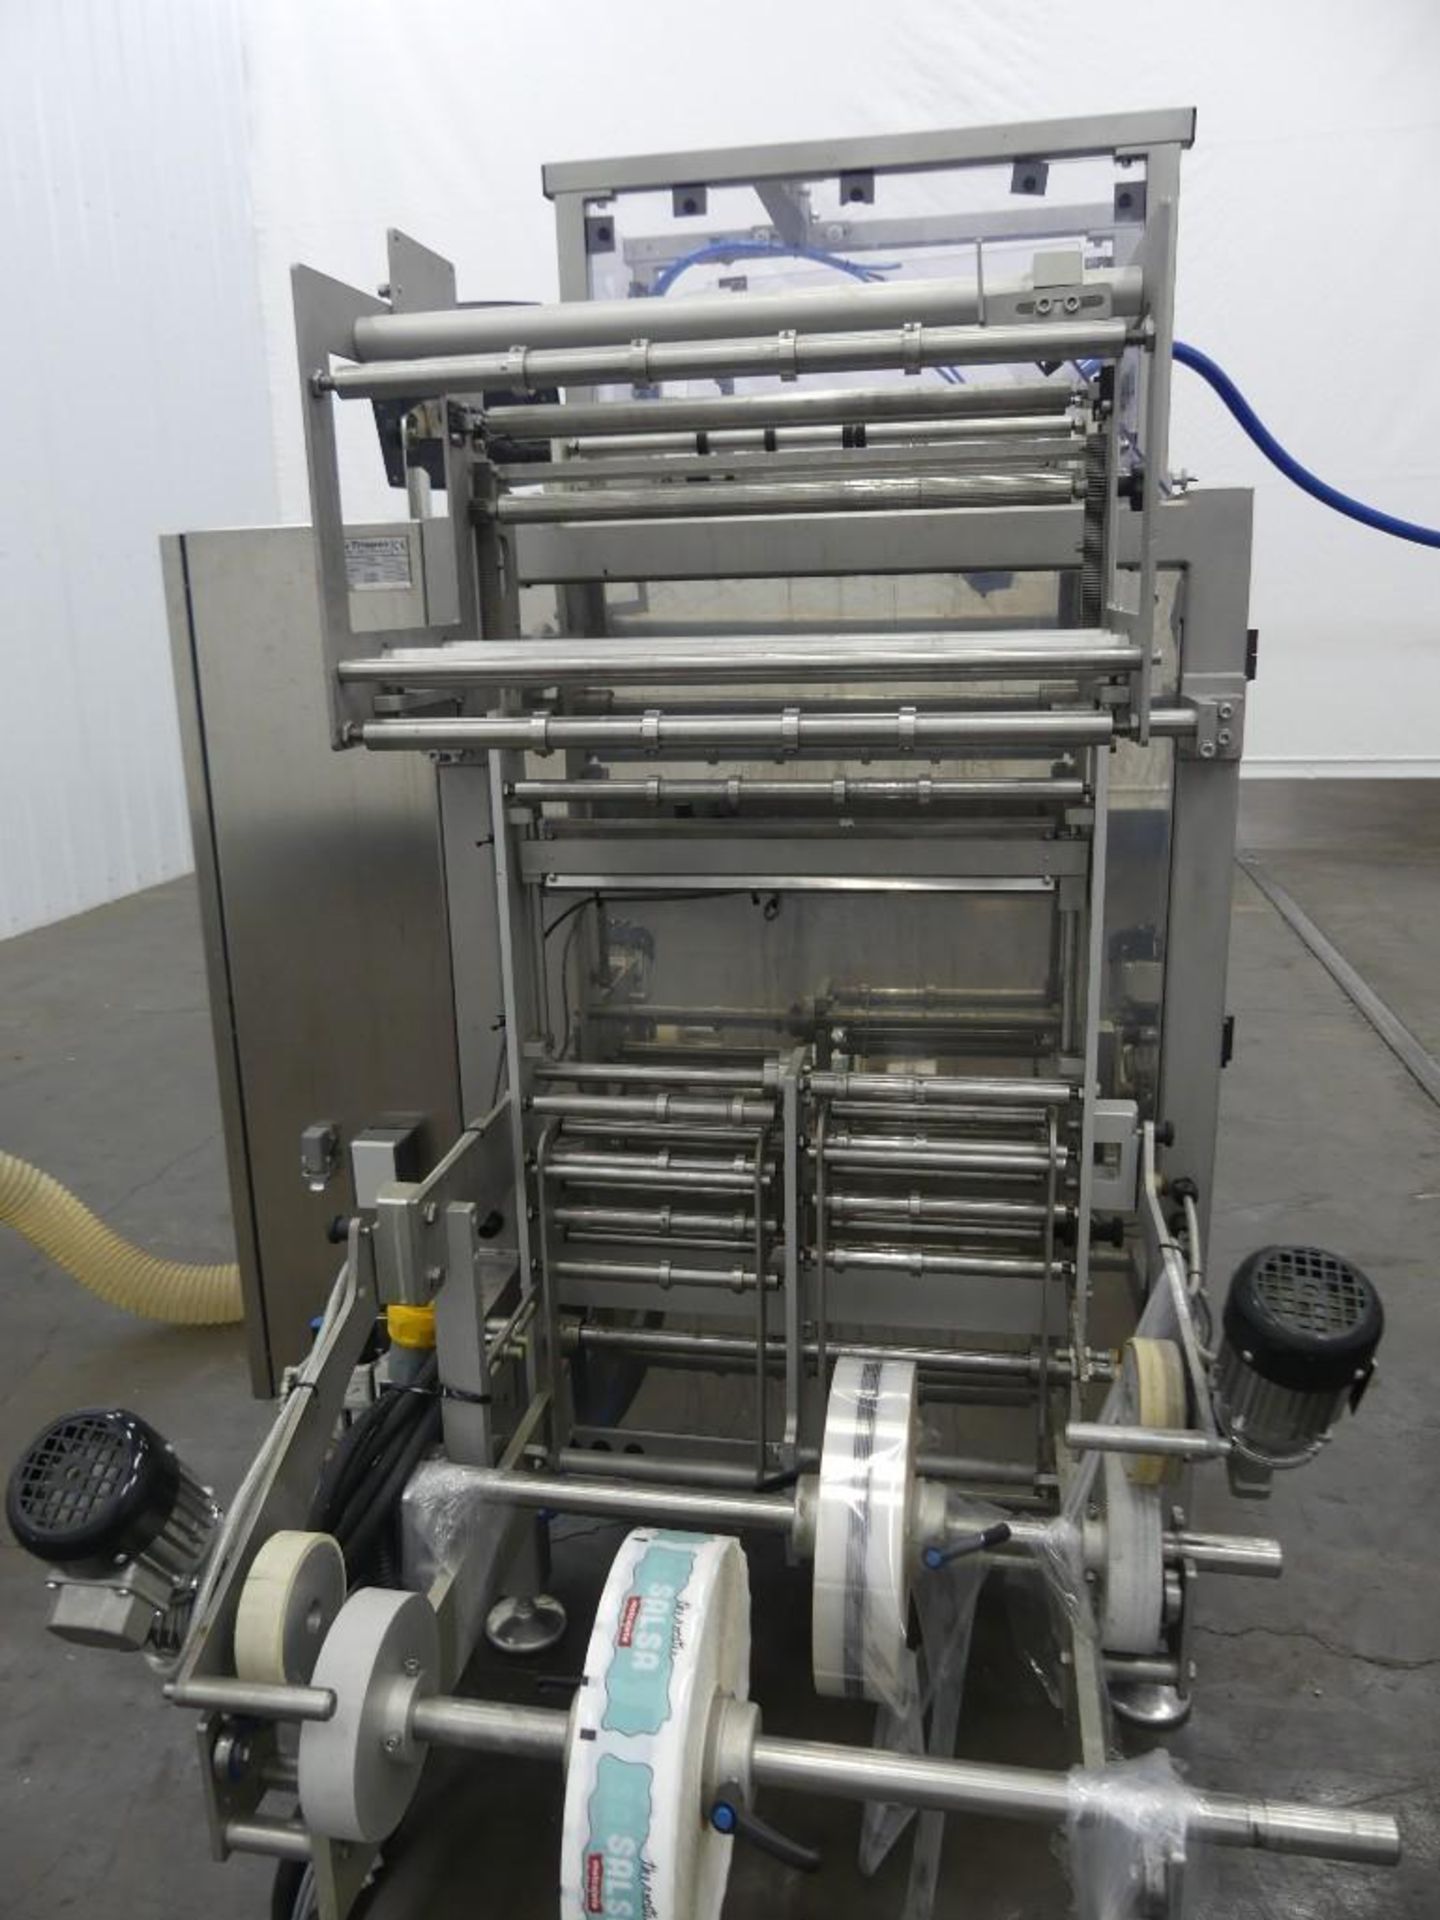 Triapex HV Stainless Steel Vertical Form Fill and Seal with Liquid Filler and Vacuum Pump - Image 14 of 36